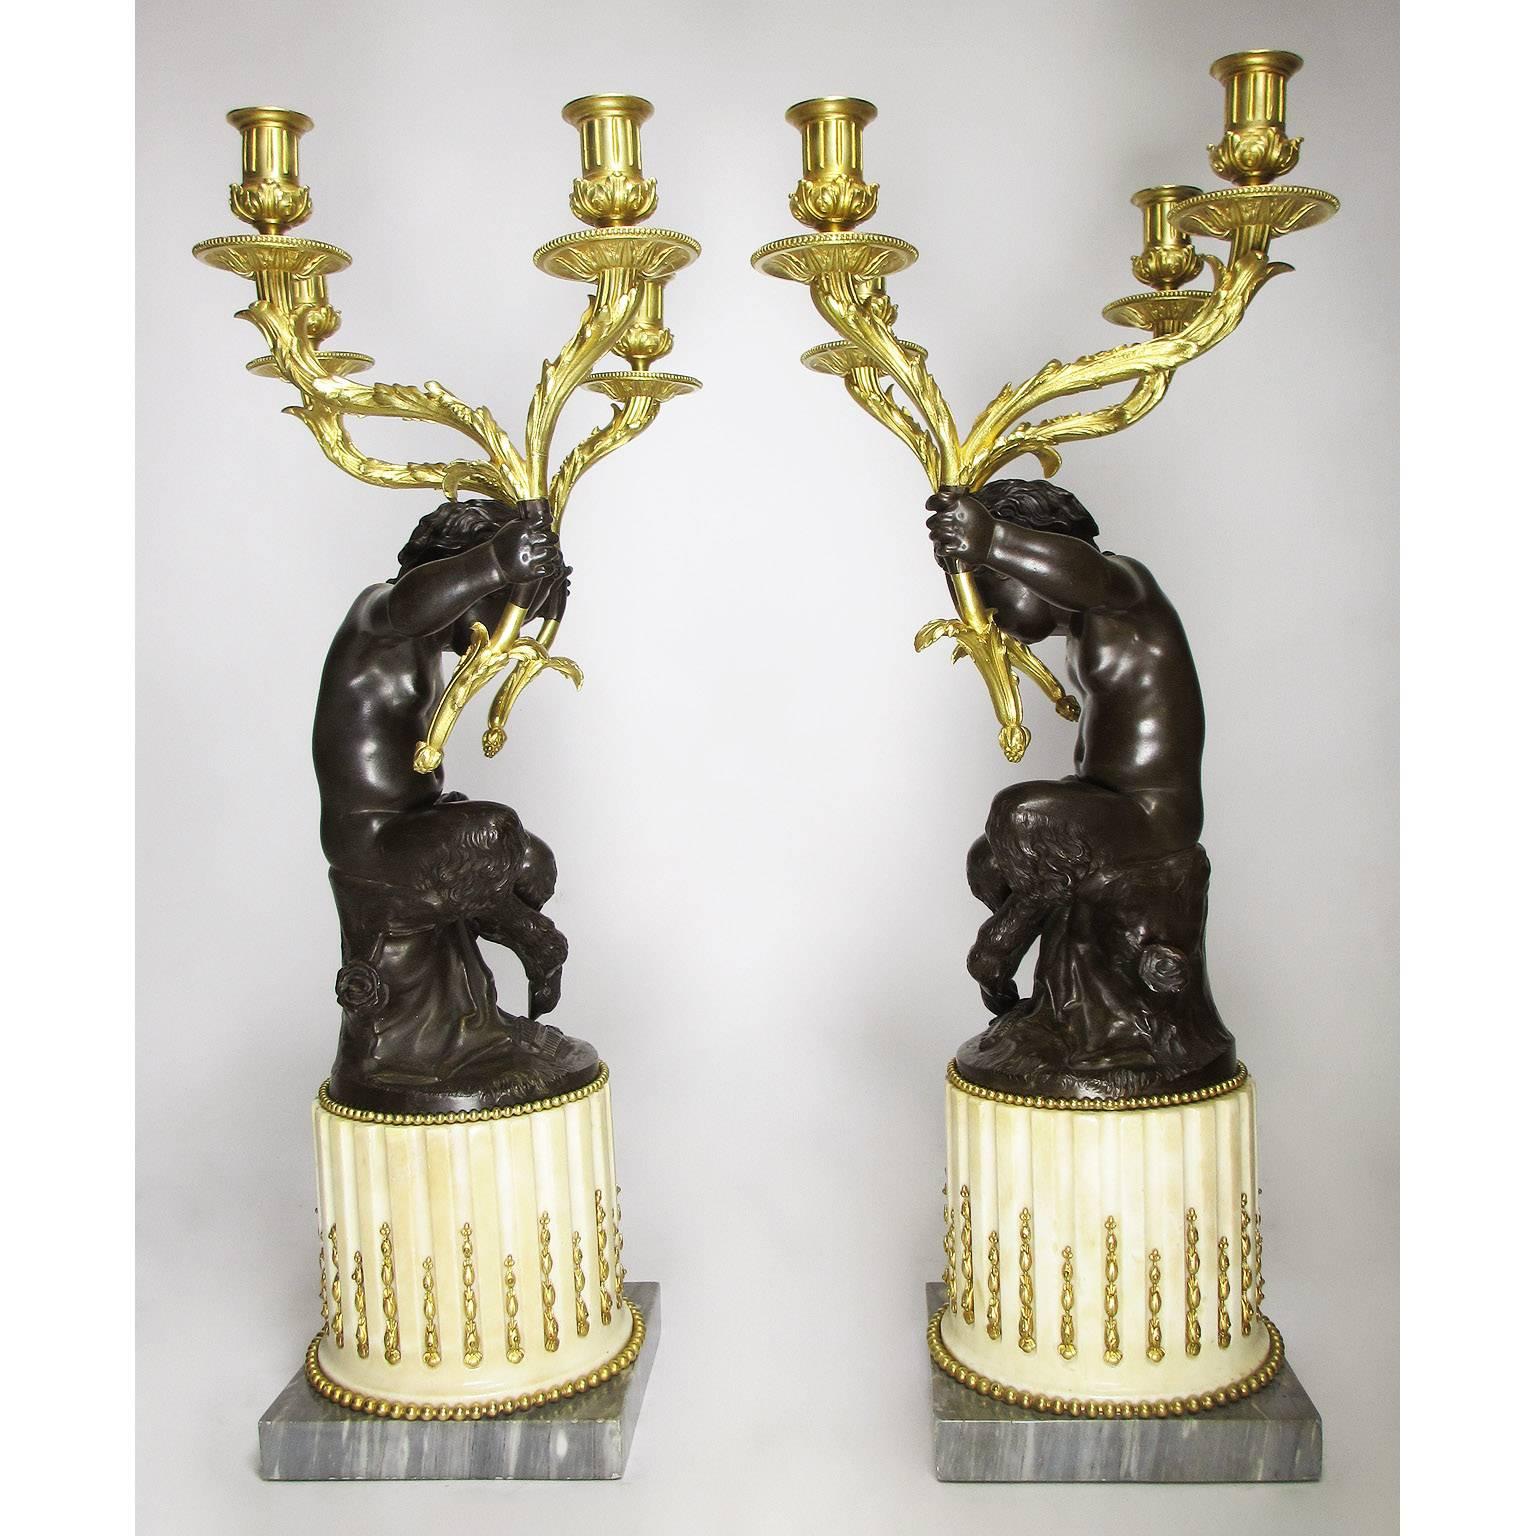 Fine Pair of French 19th Century Gilt and Patinated Bronze Figural Candelabra For Sale 3